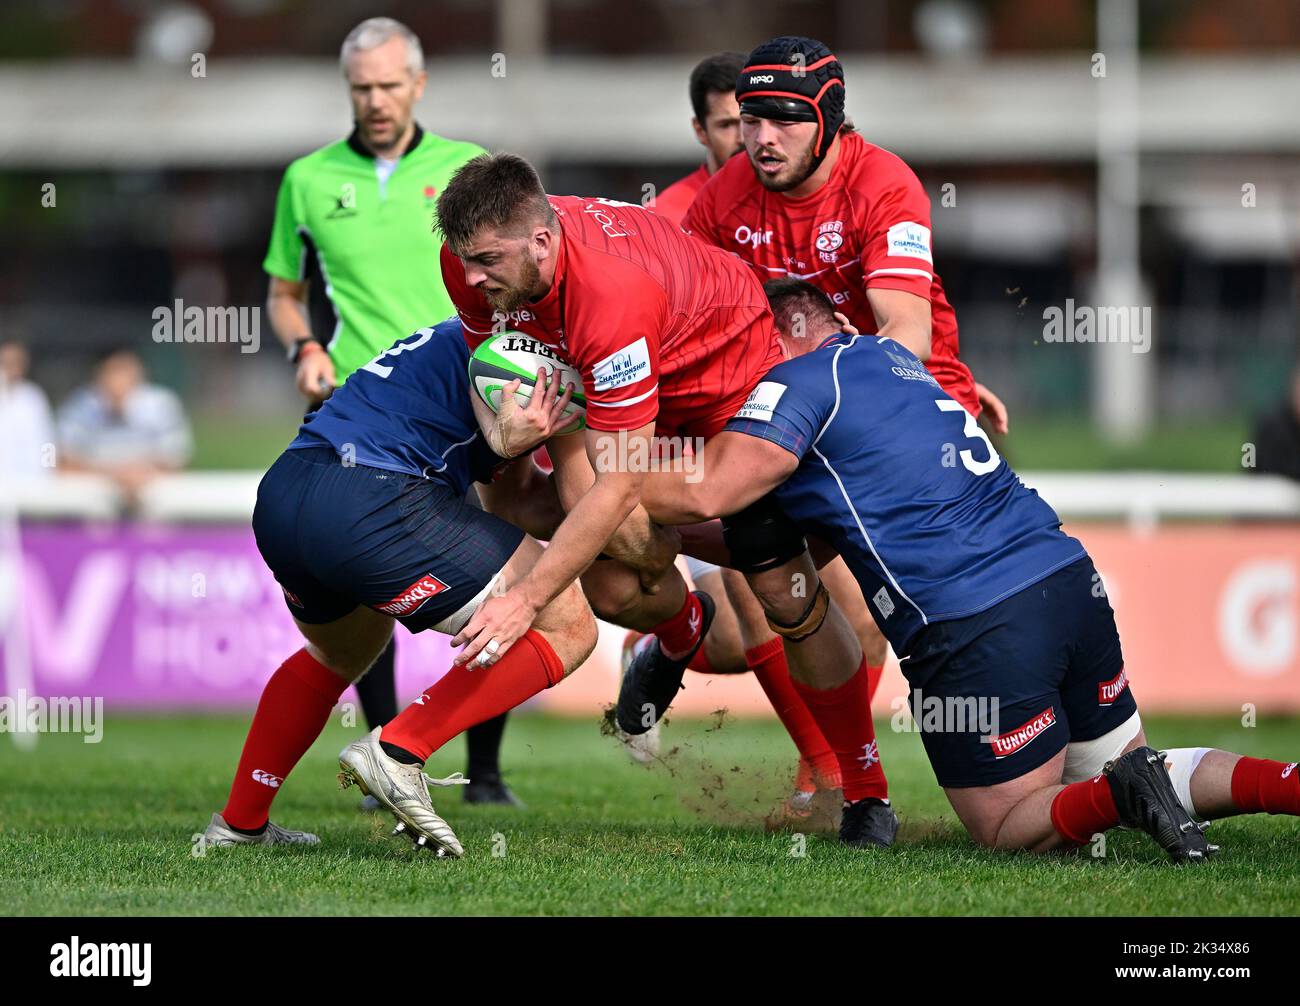 Richmond, United Kingdom. 24th Sep, 2022. Championship Rugby. London Scottish V Jersey Reds. The Richmond Athletic Ground. Richmond. Hamish Bain (Jersey Reds) is tackled by Joe Rees (London Scottish, captain, 3) and Austin Wallis (London Scottish) during the London Scottish V Jersey Reds championship rugby match. Credit: Sport In Pictures/Alamy Live News Stock Photo